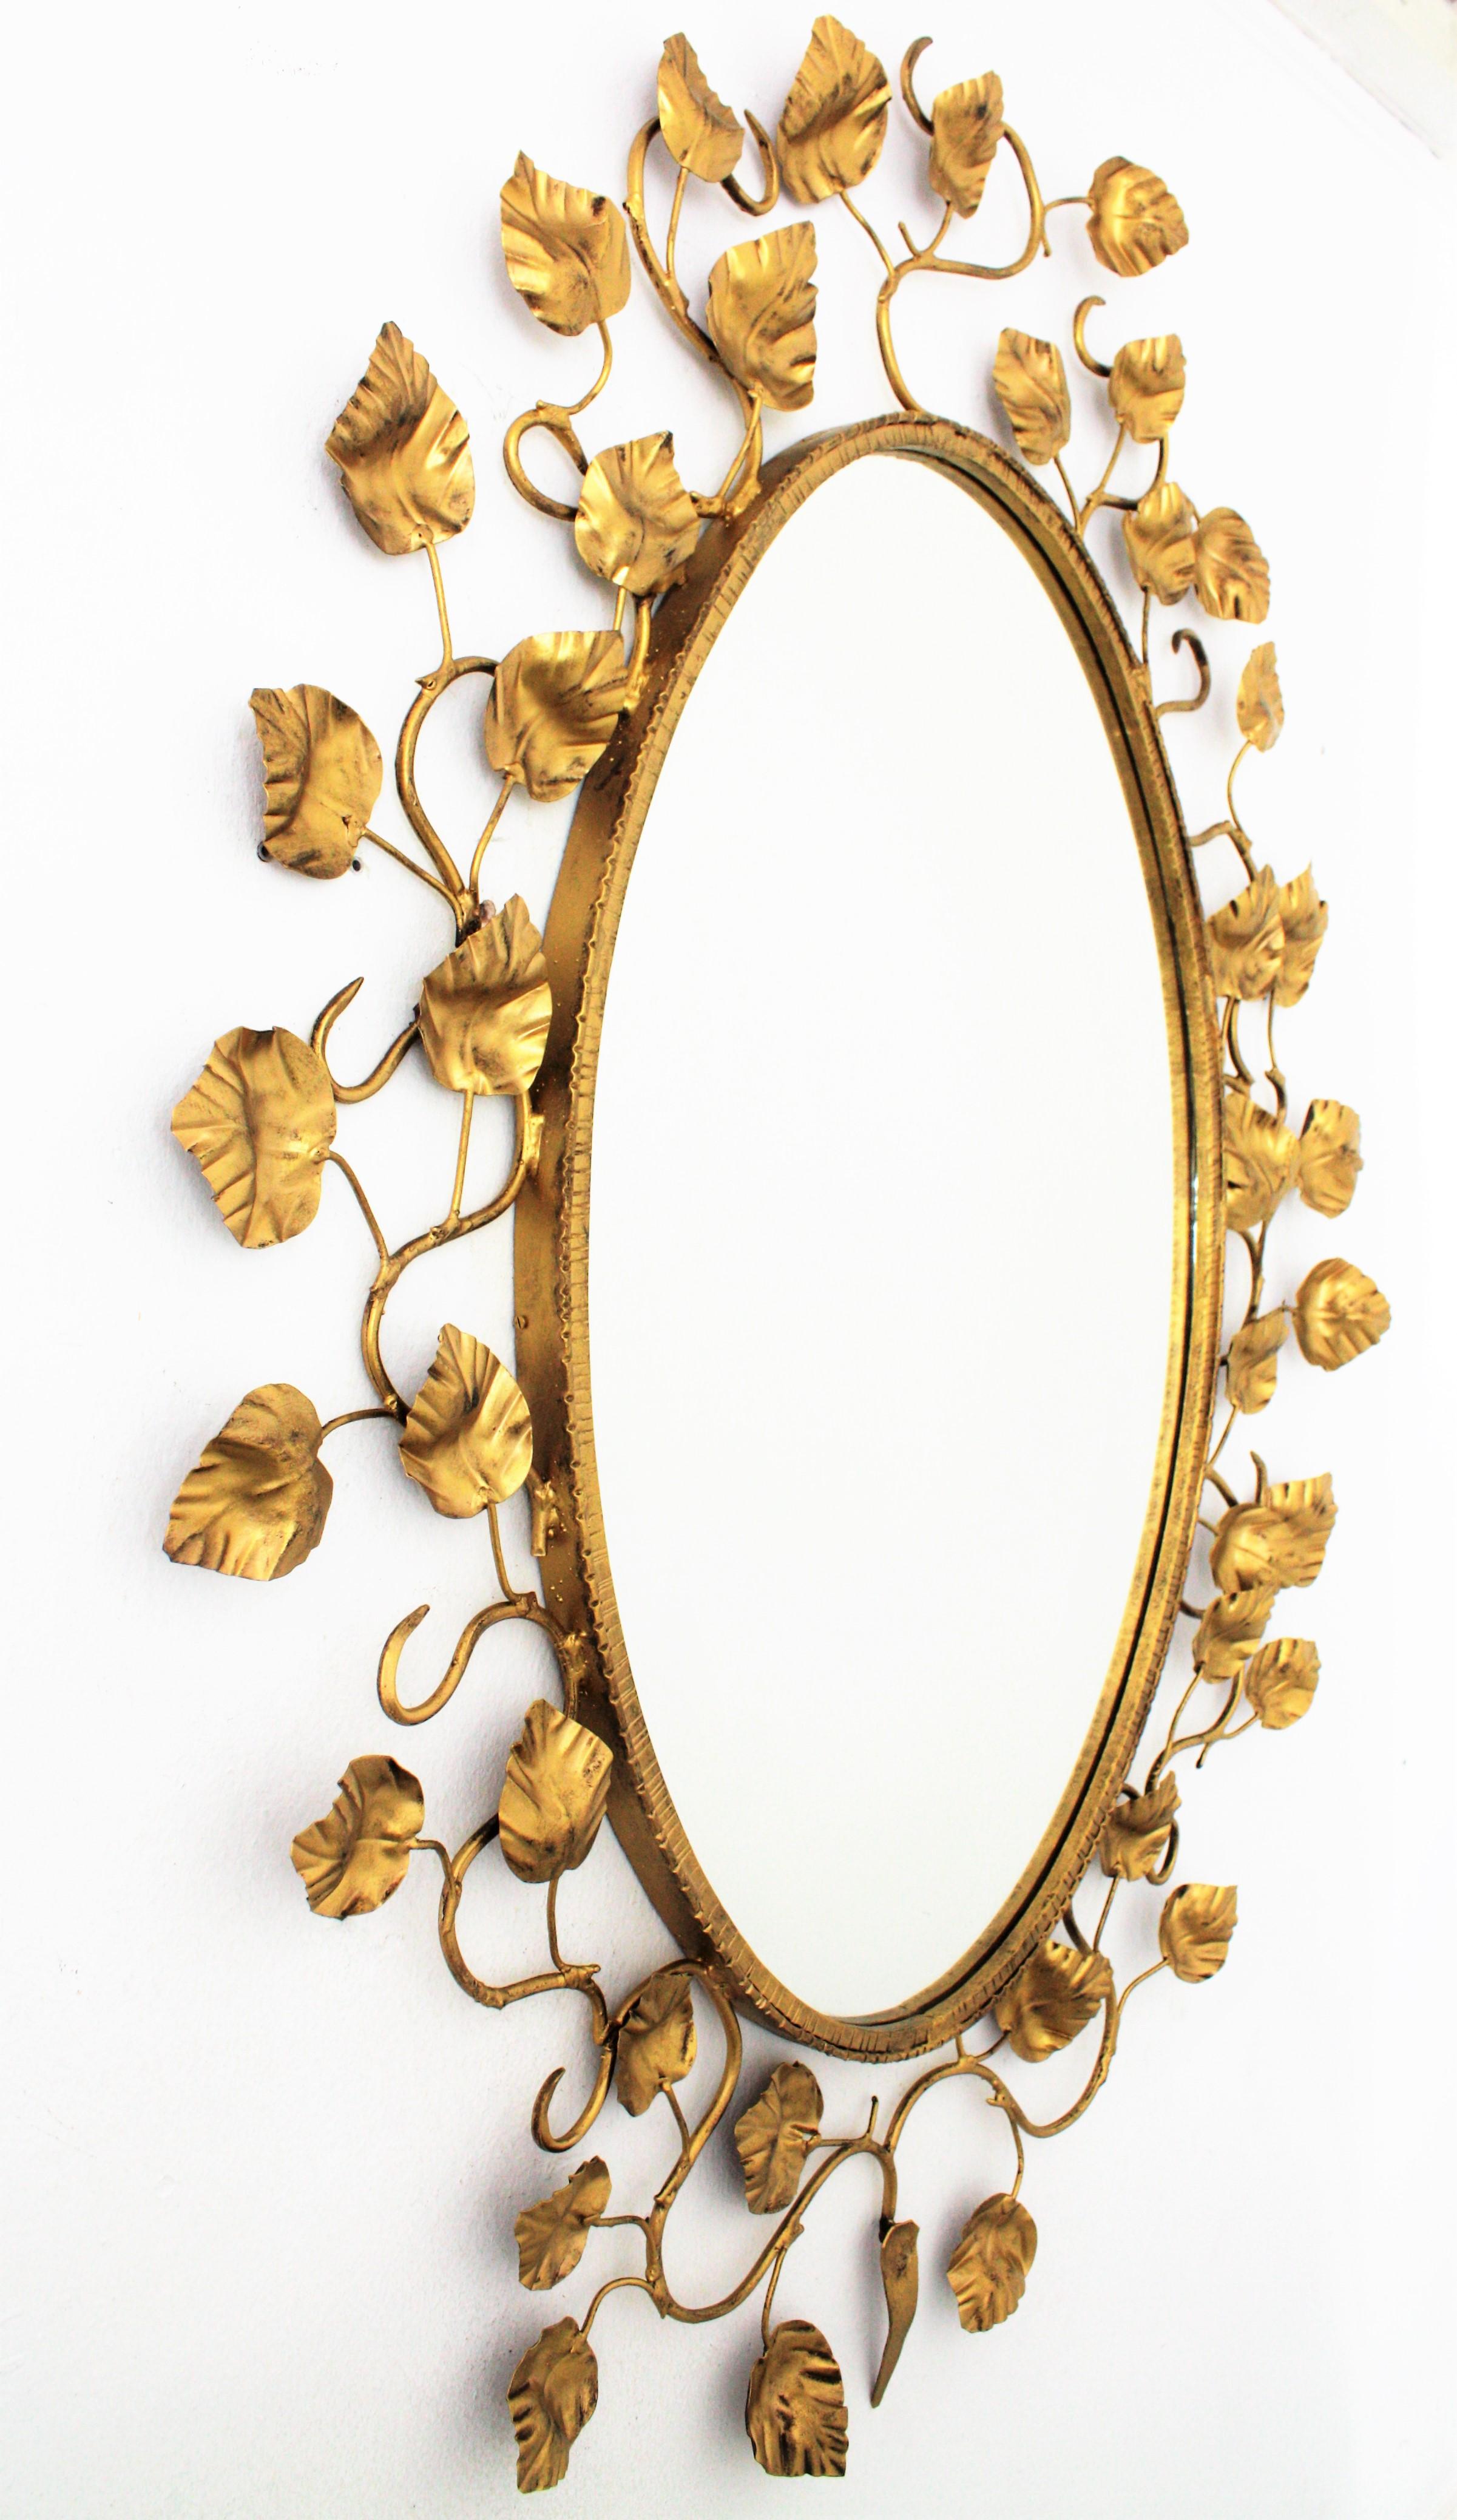 Mid-Century Modern Spanish Large Oval Mirror in Gilt Iron Foliage Frame, 1950s For Sale